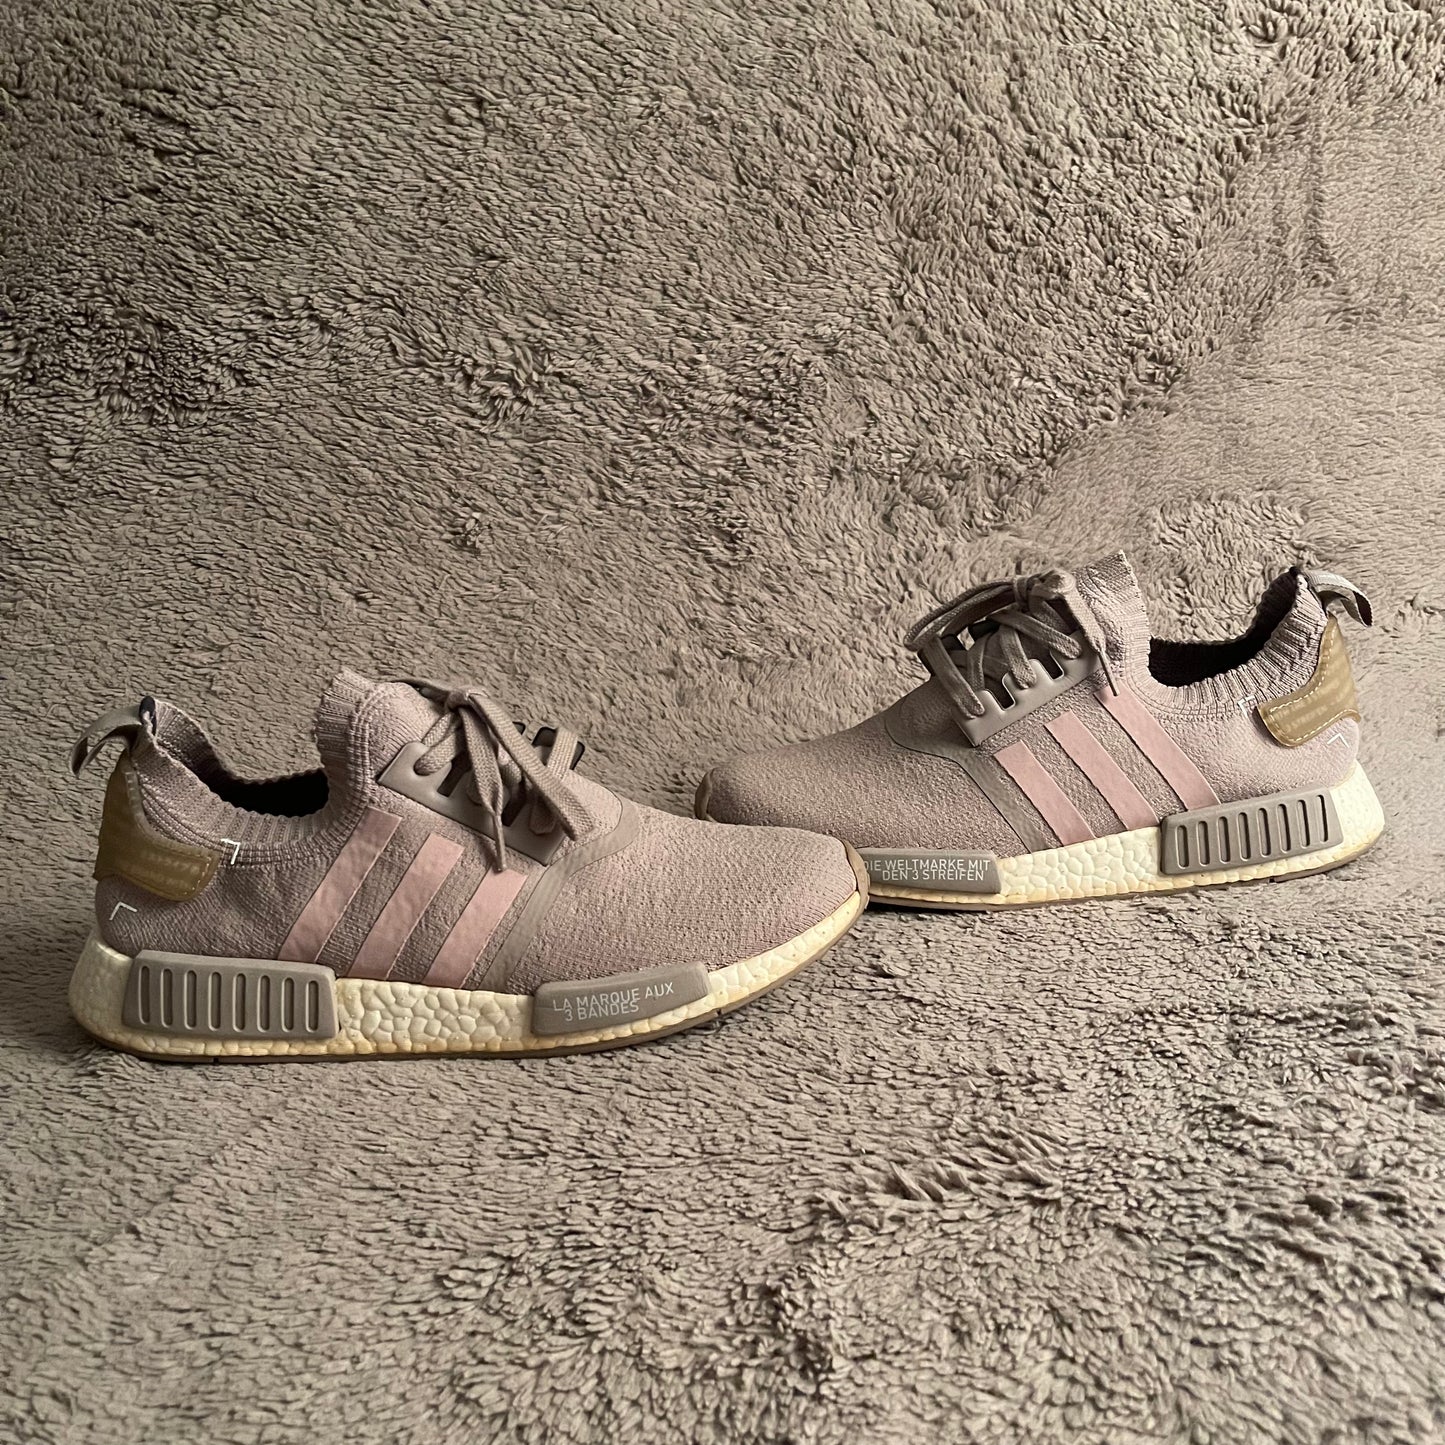 Adidas NMD R1 French Beige Sneakers